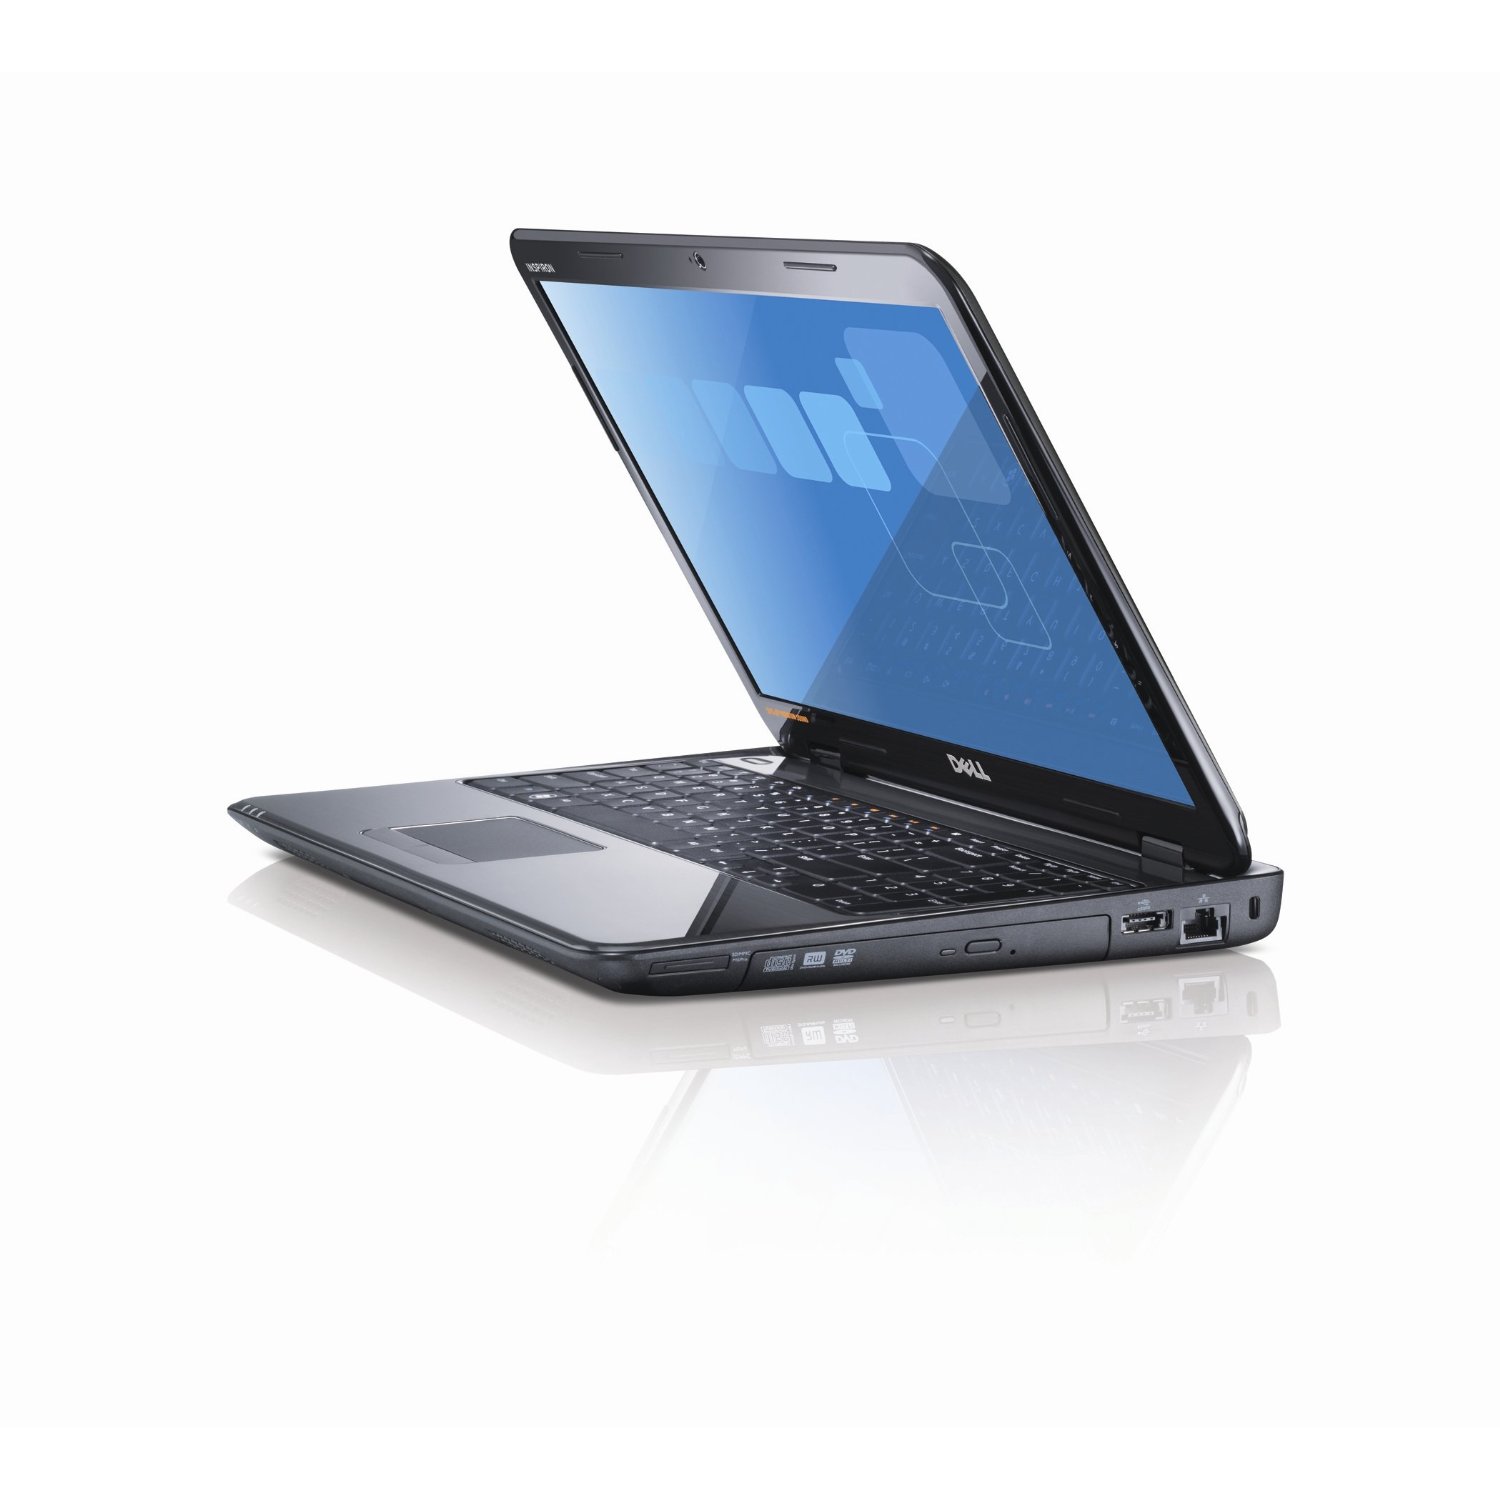 http://thetechjournal.com/wp-content/uploads/images/1110/1318421913-dell-inspiron-15r-i15rn51107223dbk-156inch-laptop-9.jpg